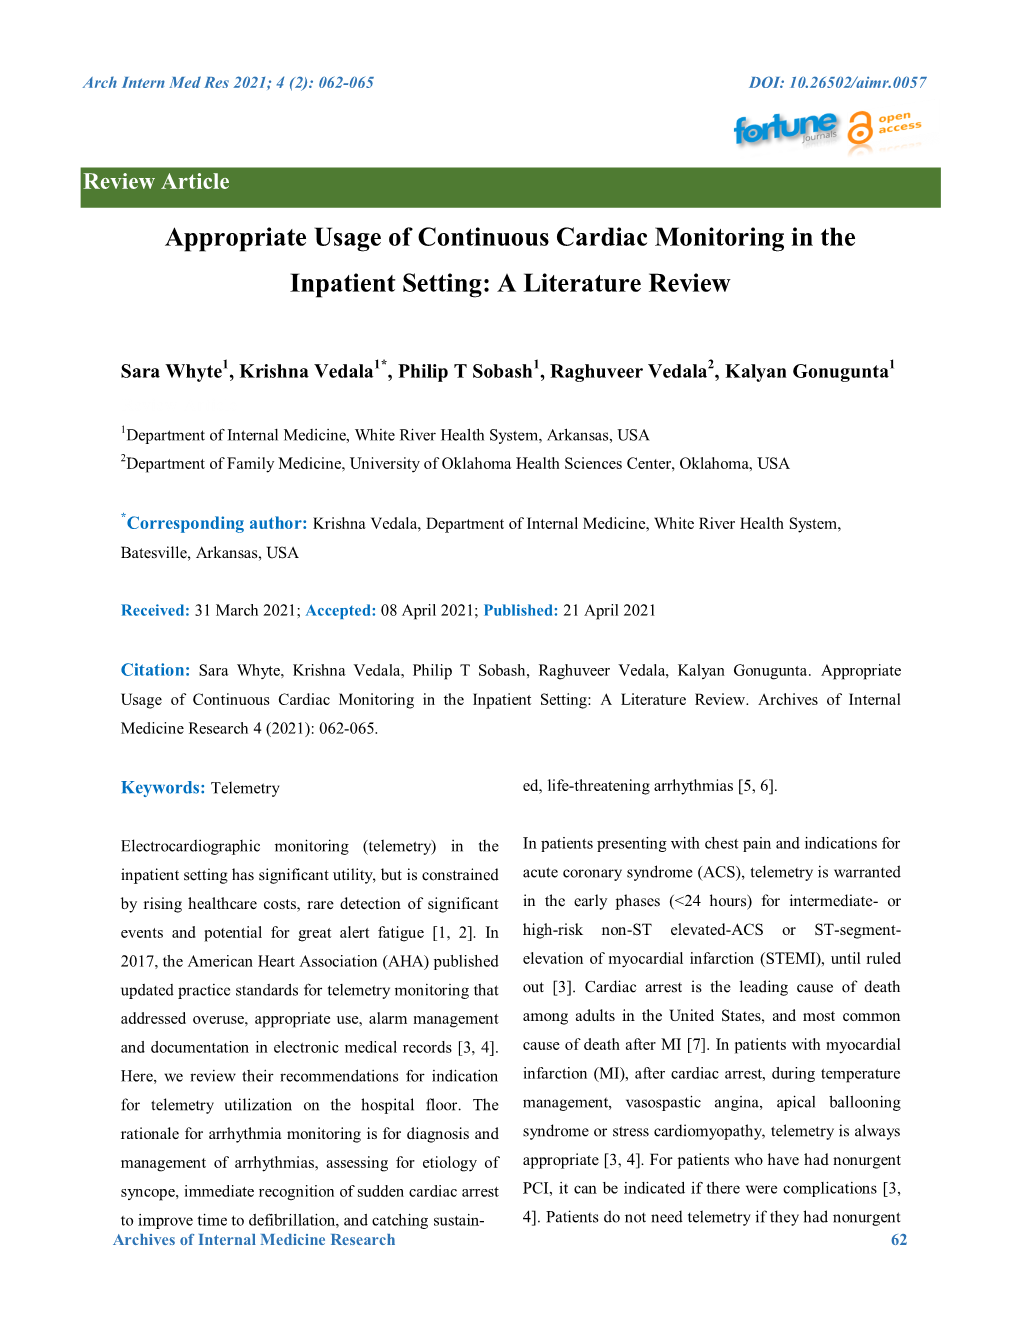 Appropriate Usage of Continuous Cardiac Monitoring in the Inpatient Setting: a Literature Review